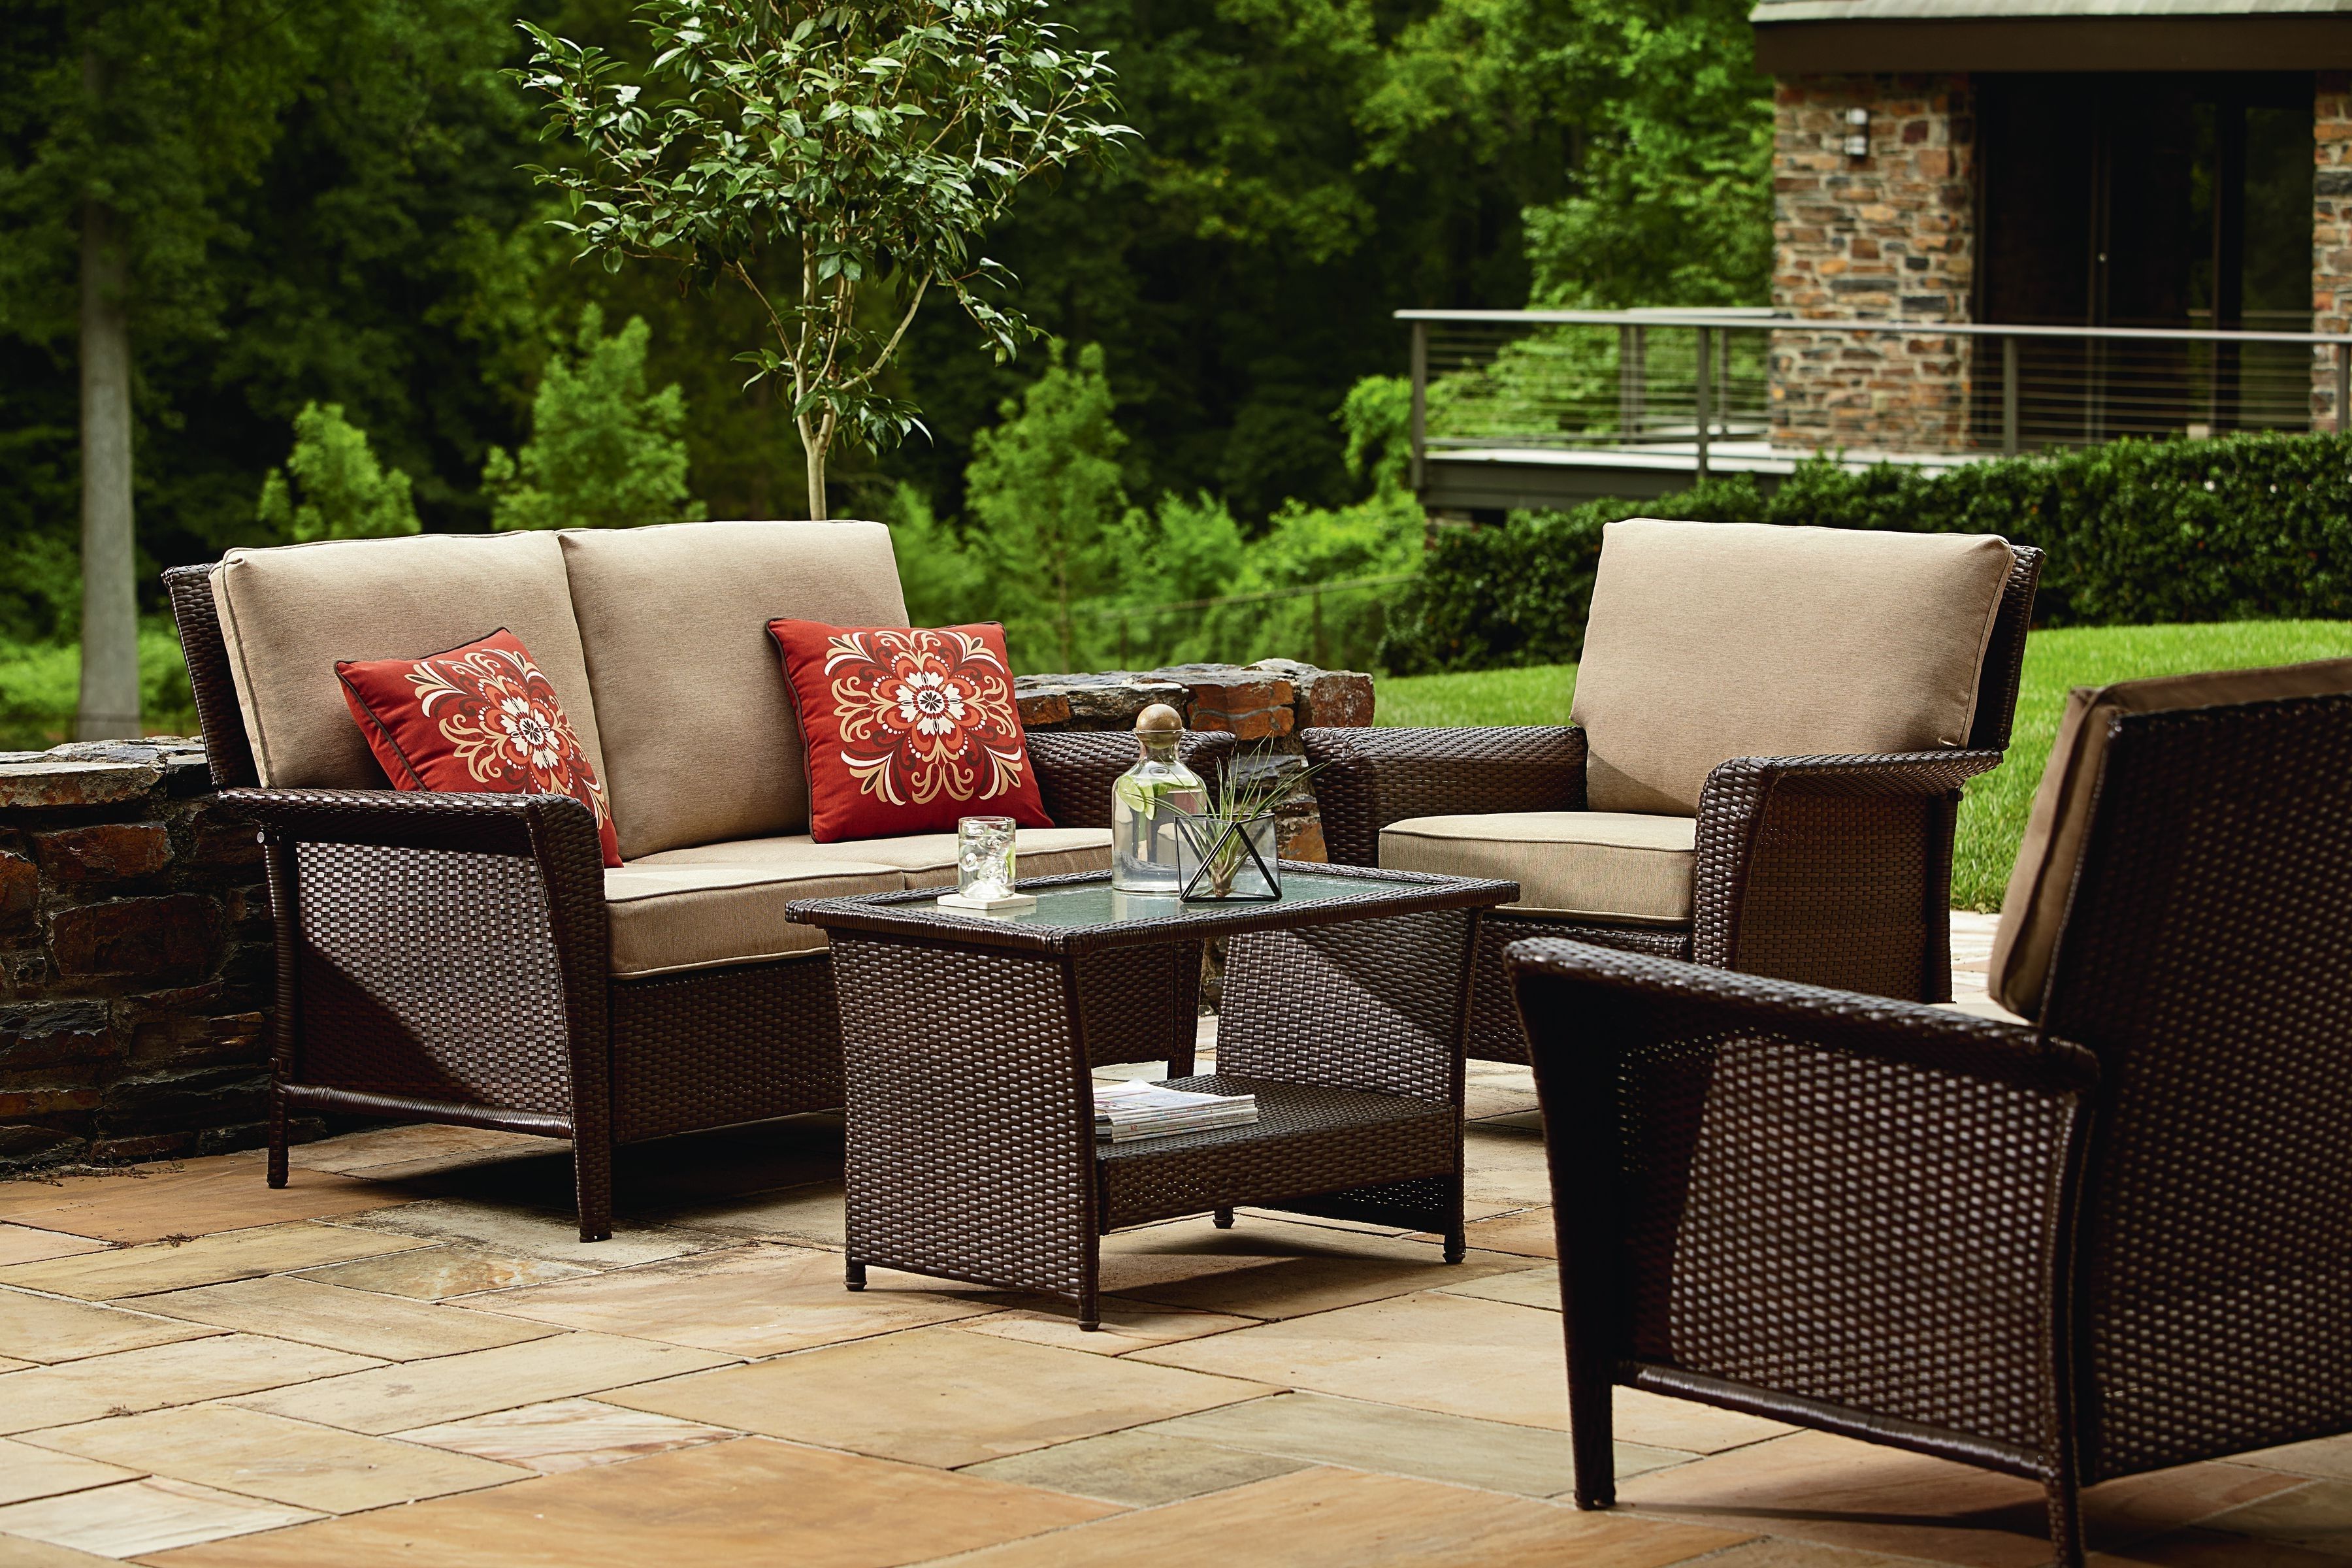 Patio Conversation Sets At Sears Throughout Newest Nice Outdoor Patio Furniture Orlando Design New In Lighting Interior (View 1 of 15)